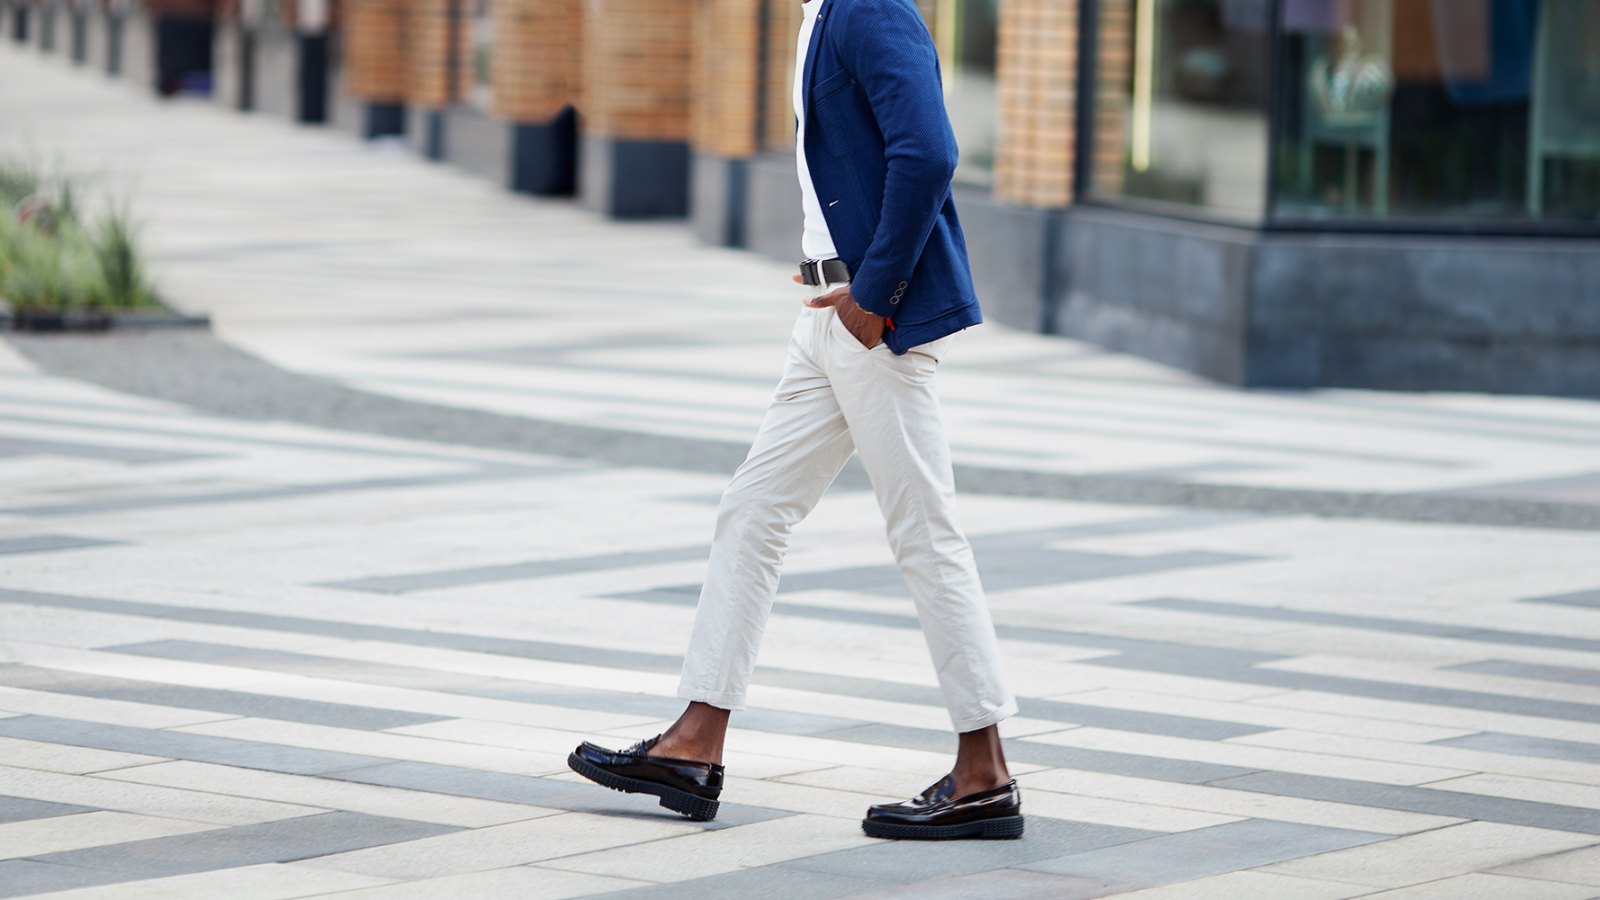 Man walks down the street in loafers.